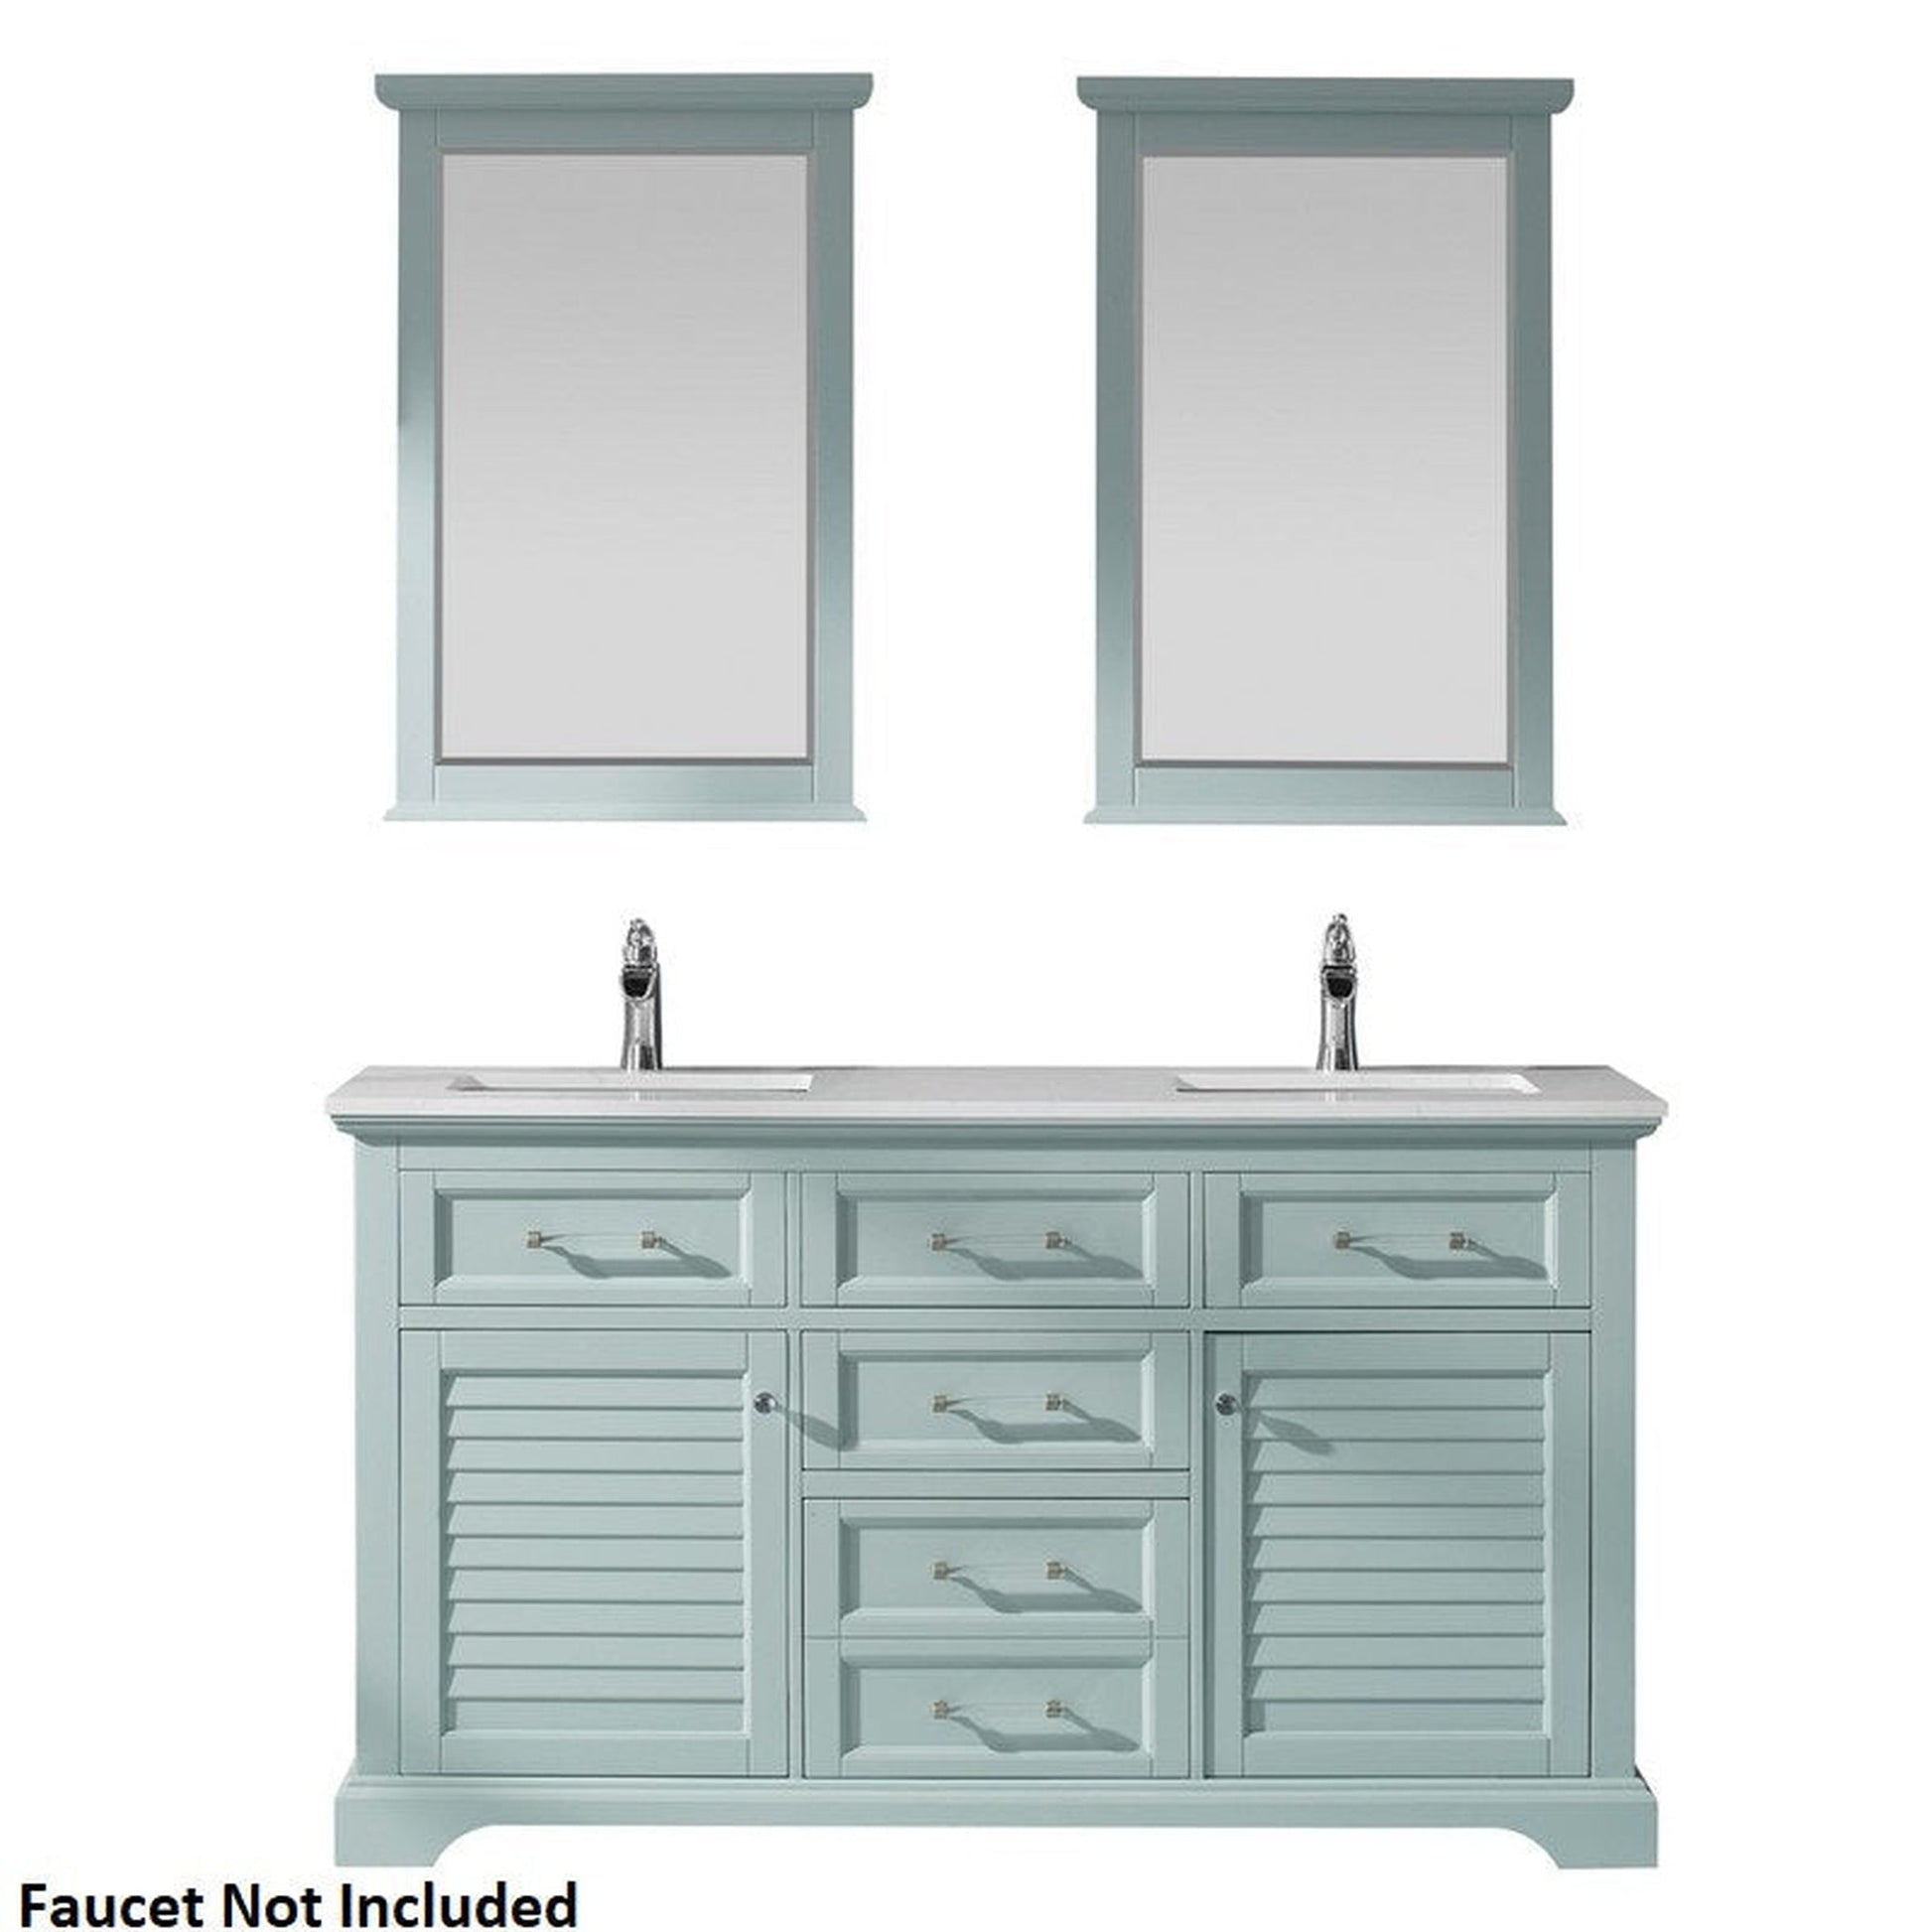 Vinnova Lorna 60" Finnish Green Freestanding Double Vanity Set In White Carrara Composite Stone Top With Undermount Ceramic Sink and Mirror